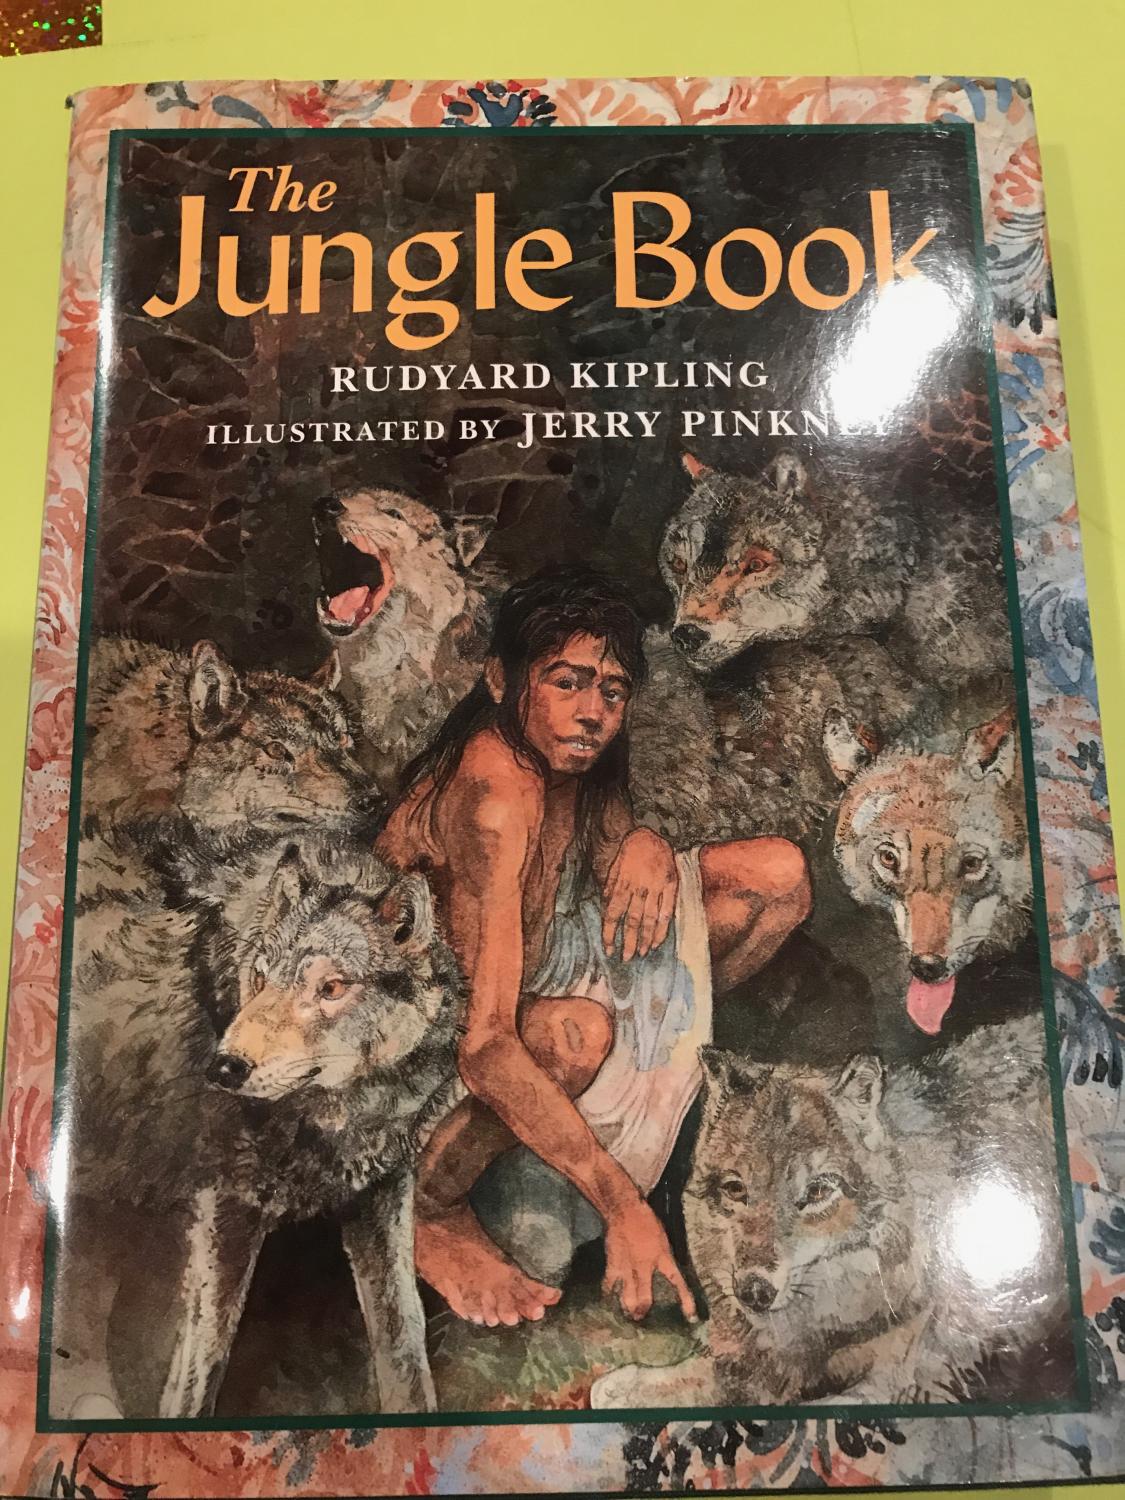 Happy　Rudyard:　NF　Mowgli　Signed　(1995)　BOOK　Author(s)　Kipling,　THE　Hardcover　stories　by　JUNGLE　Heroes　THE　by